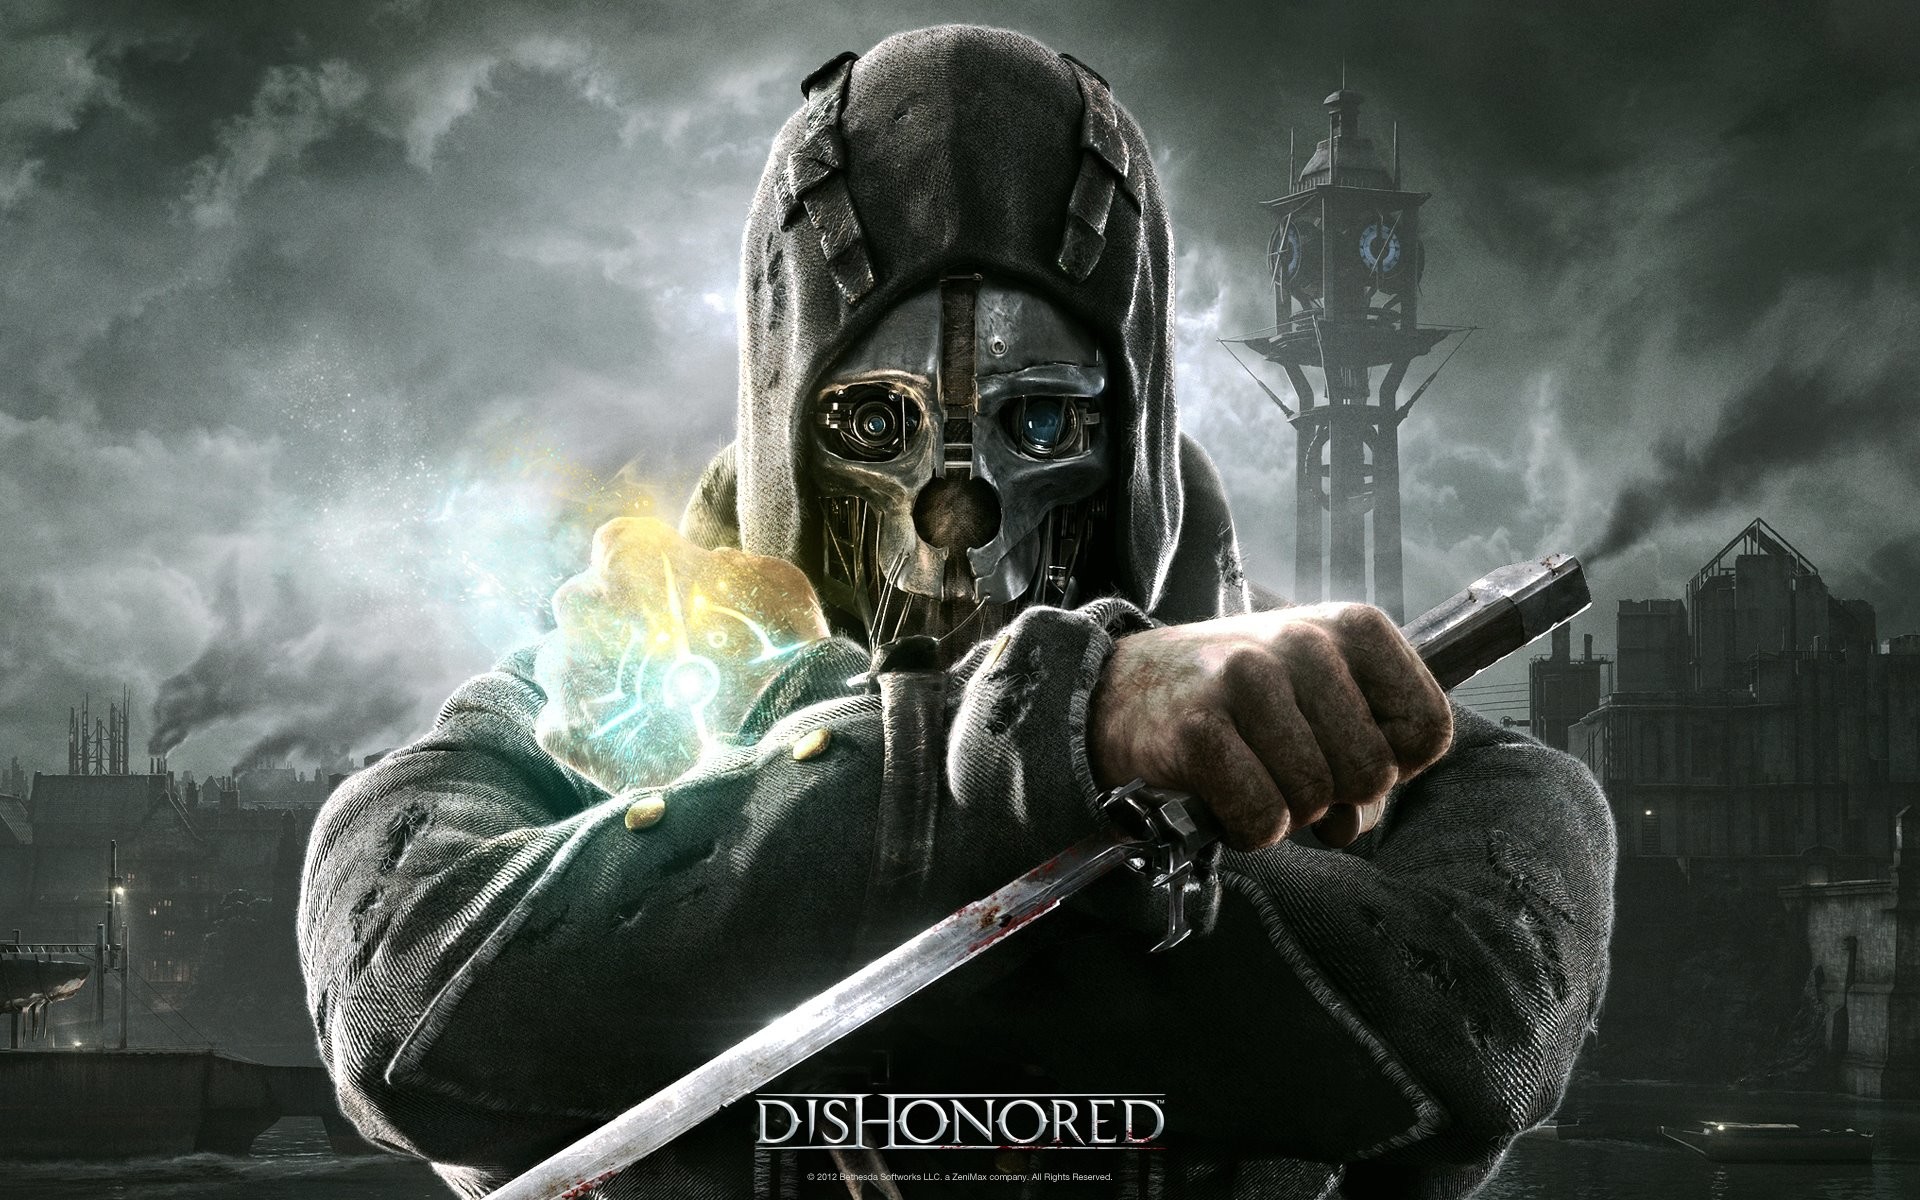 1920x1200 VGA12: Dishonored Wins Best Action Adventure Game